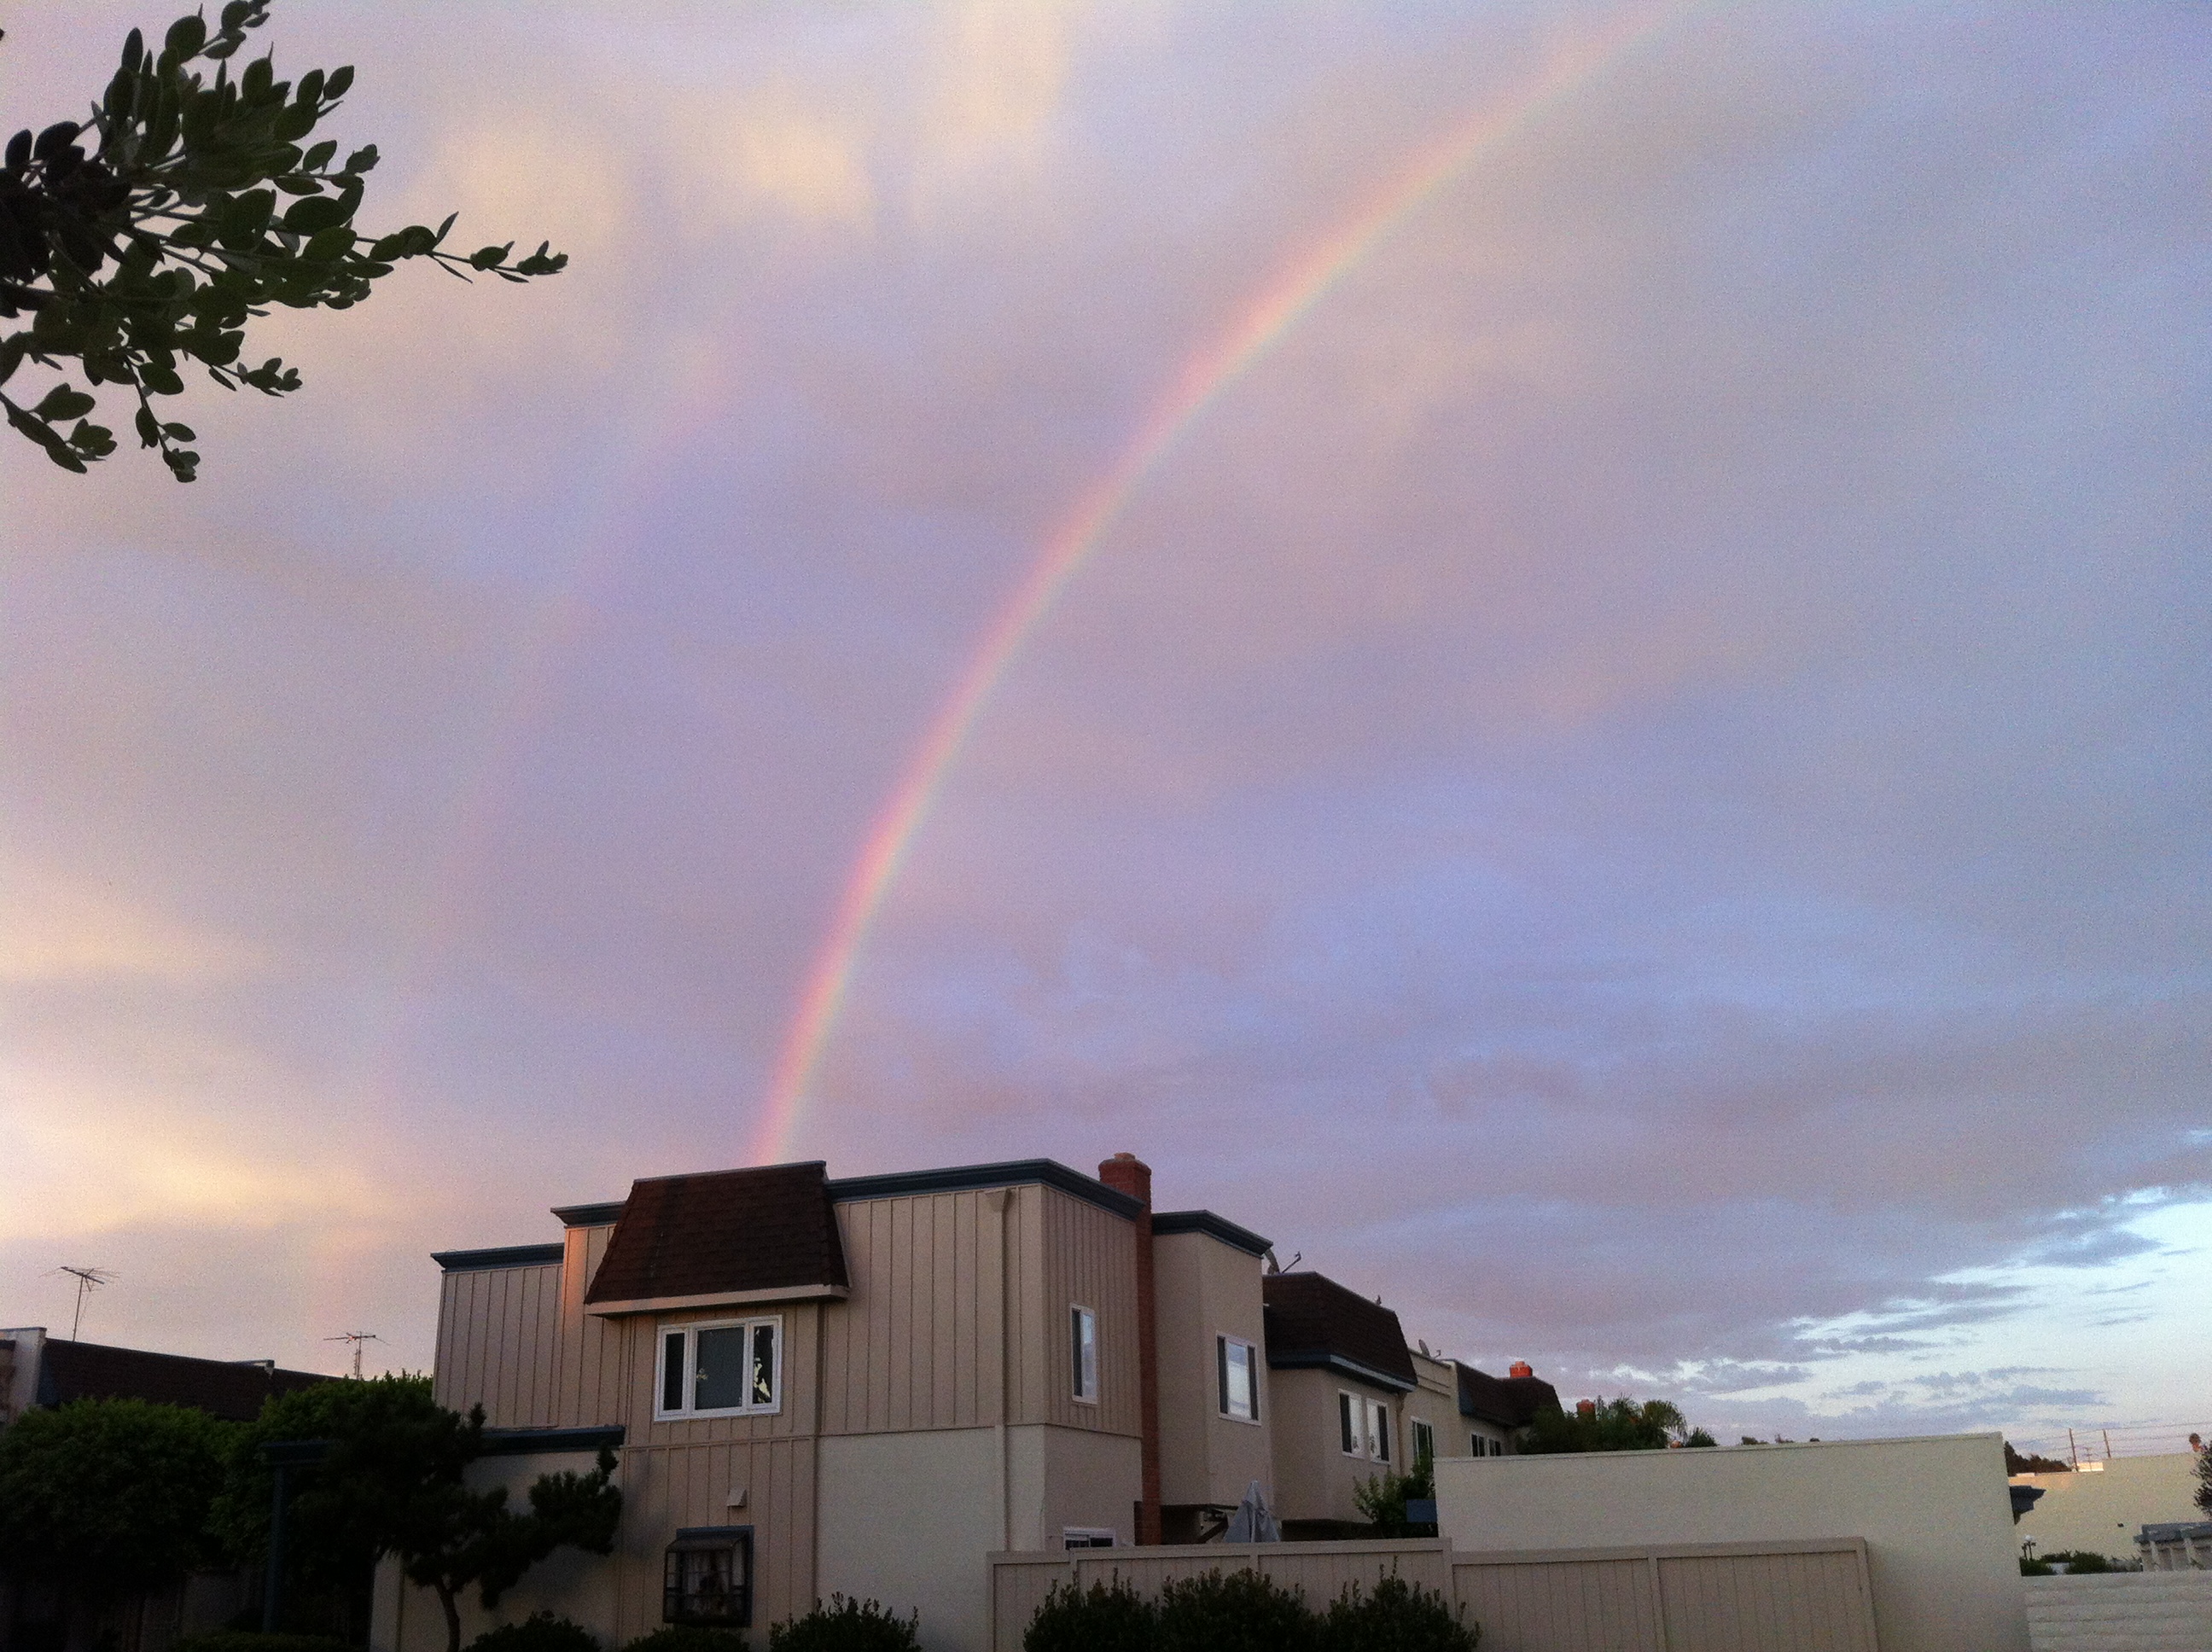 A rainbow appears over the home of someone who is trying to get free from abuse. She has been praying and God has given her an answer: Don't belive those lies, a life of abuse is not my will for you. Trust me, and I will rescue you.